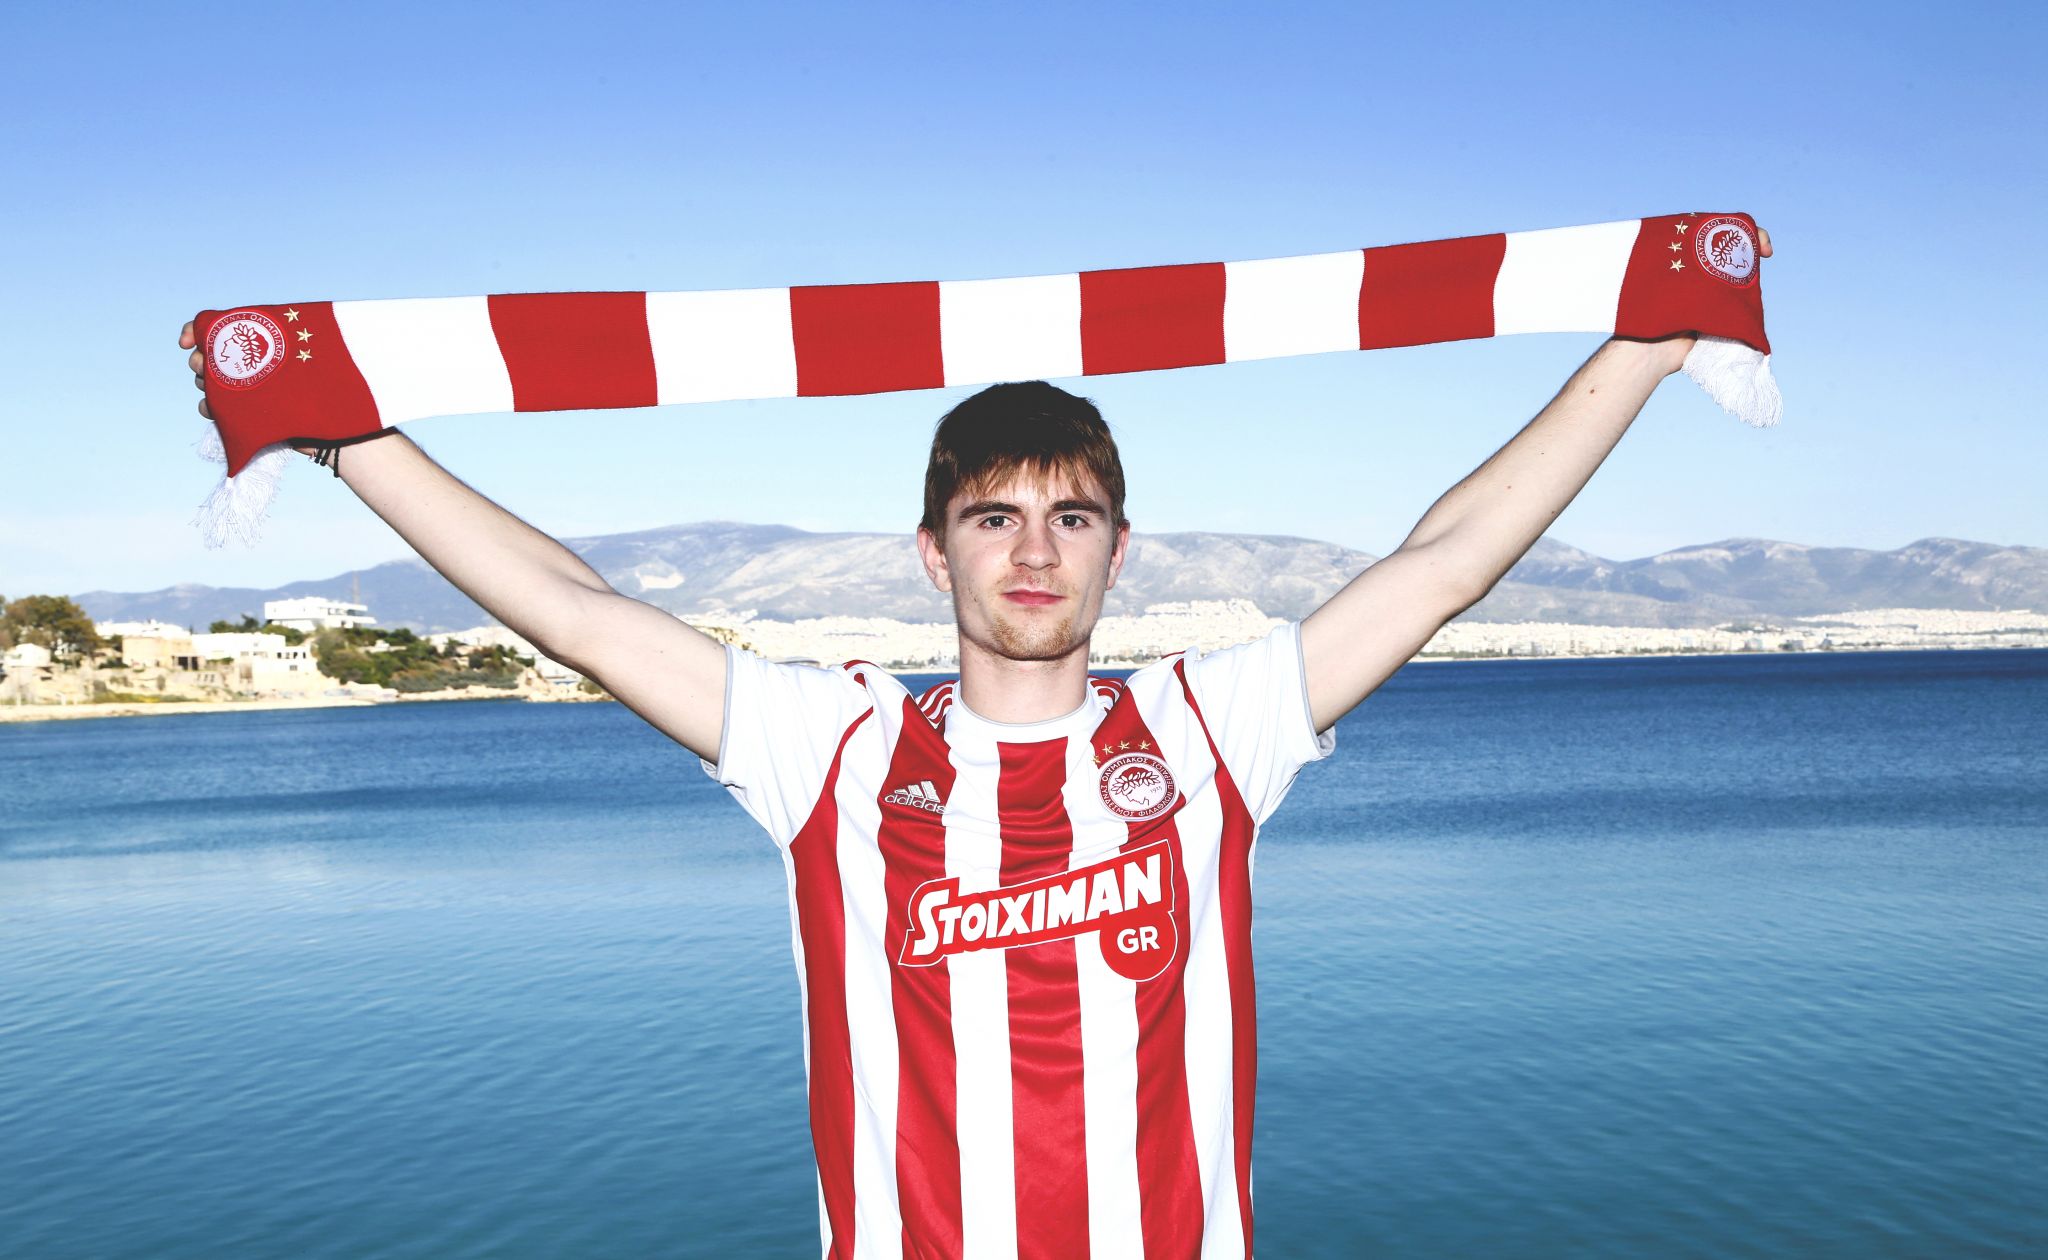 Photostory from the transfer of Apostolos Apostolopoulos at Olympiacos